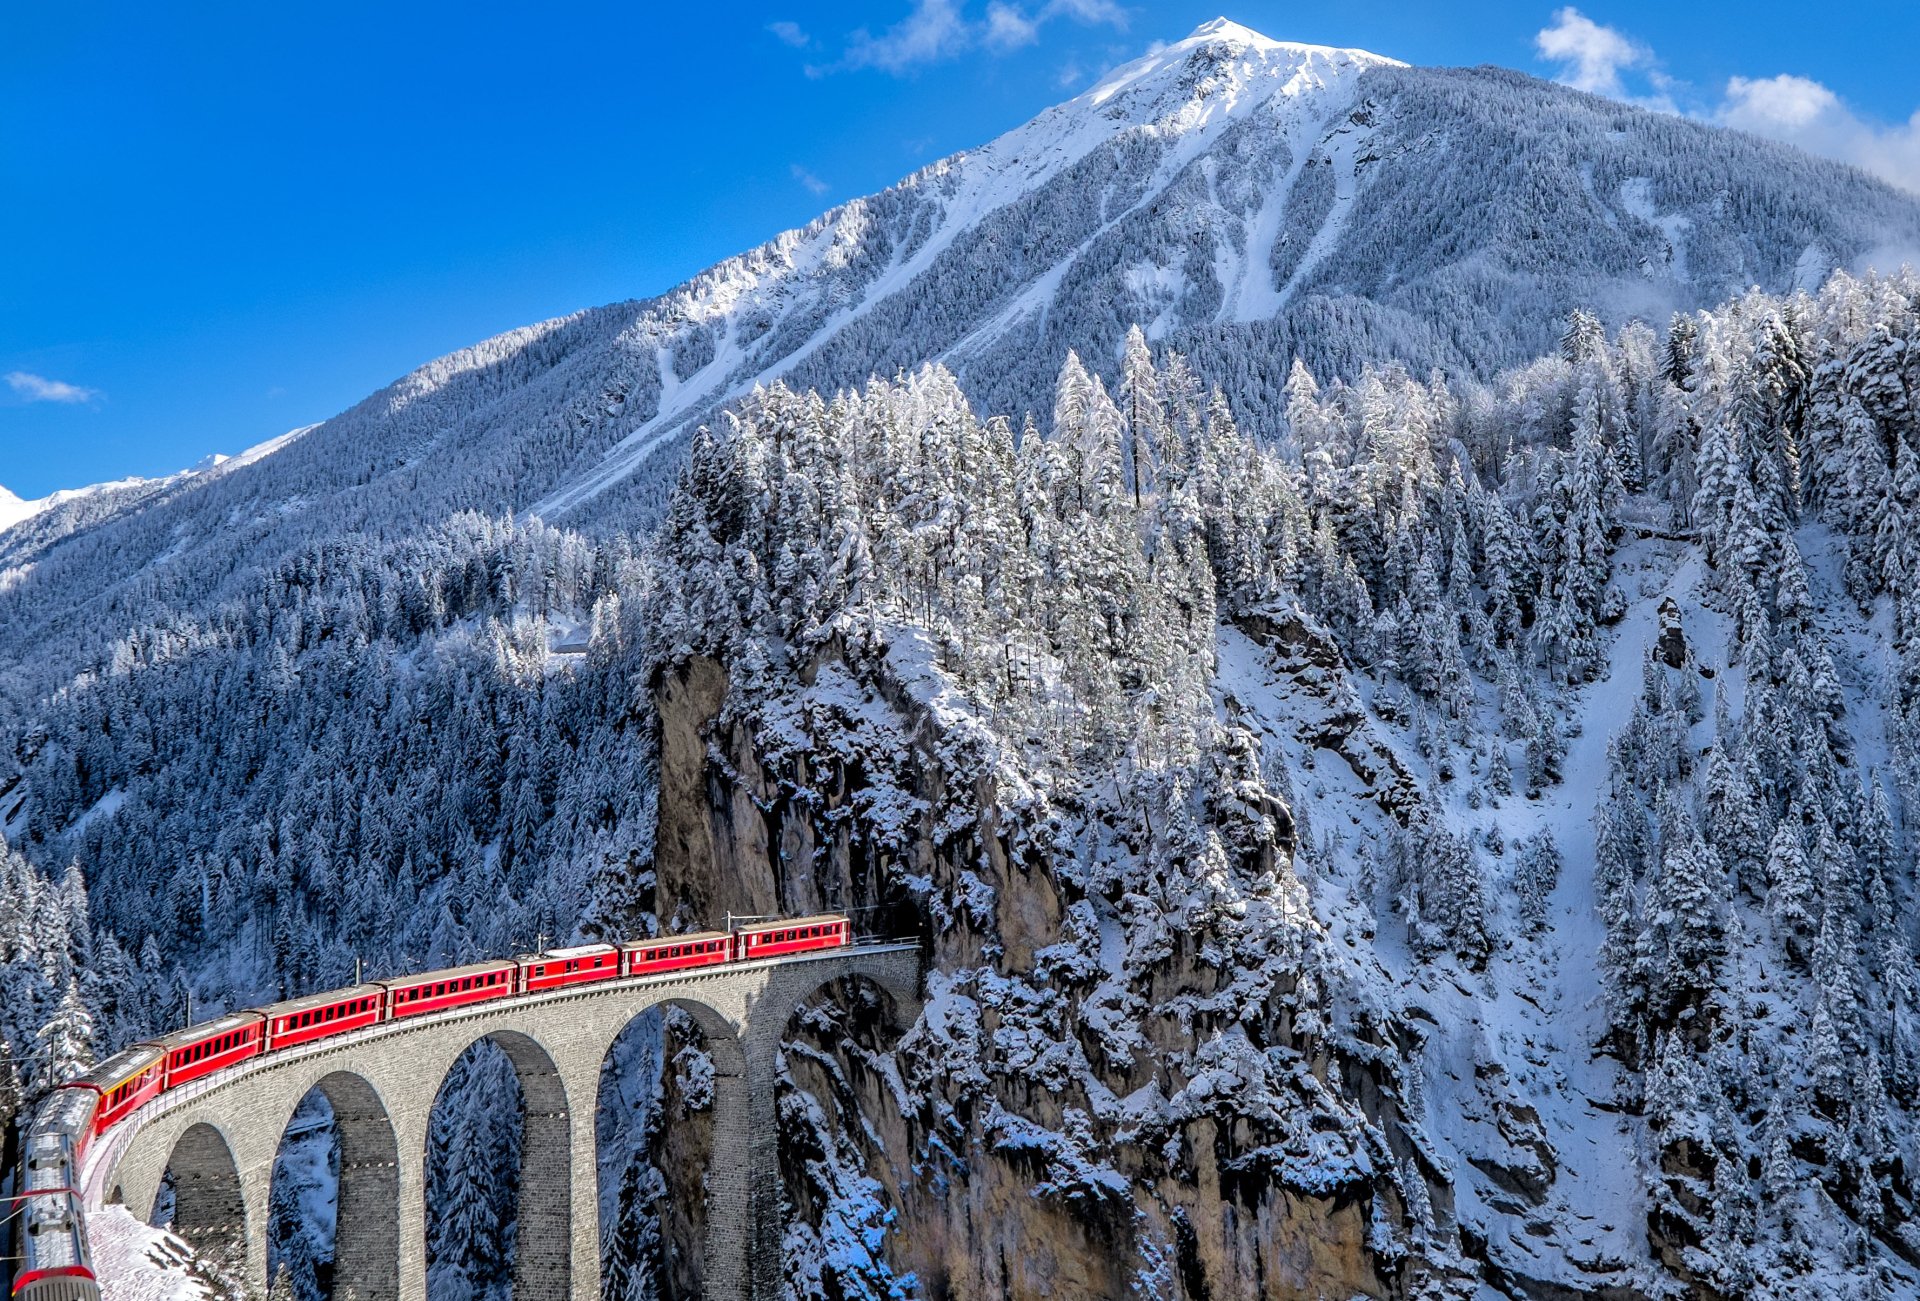 The Glacier Express HD Wallpaper Background Image